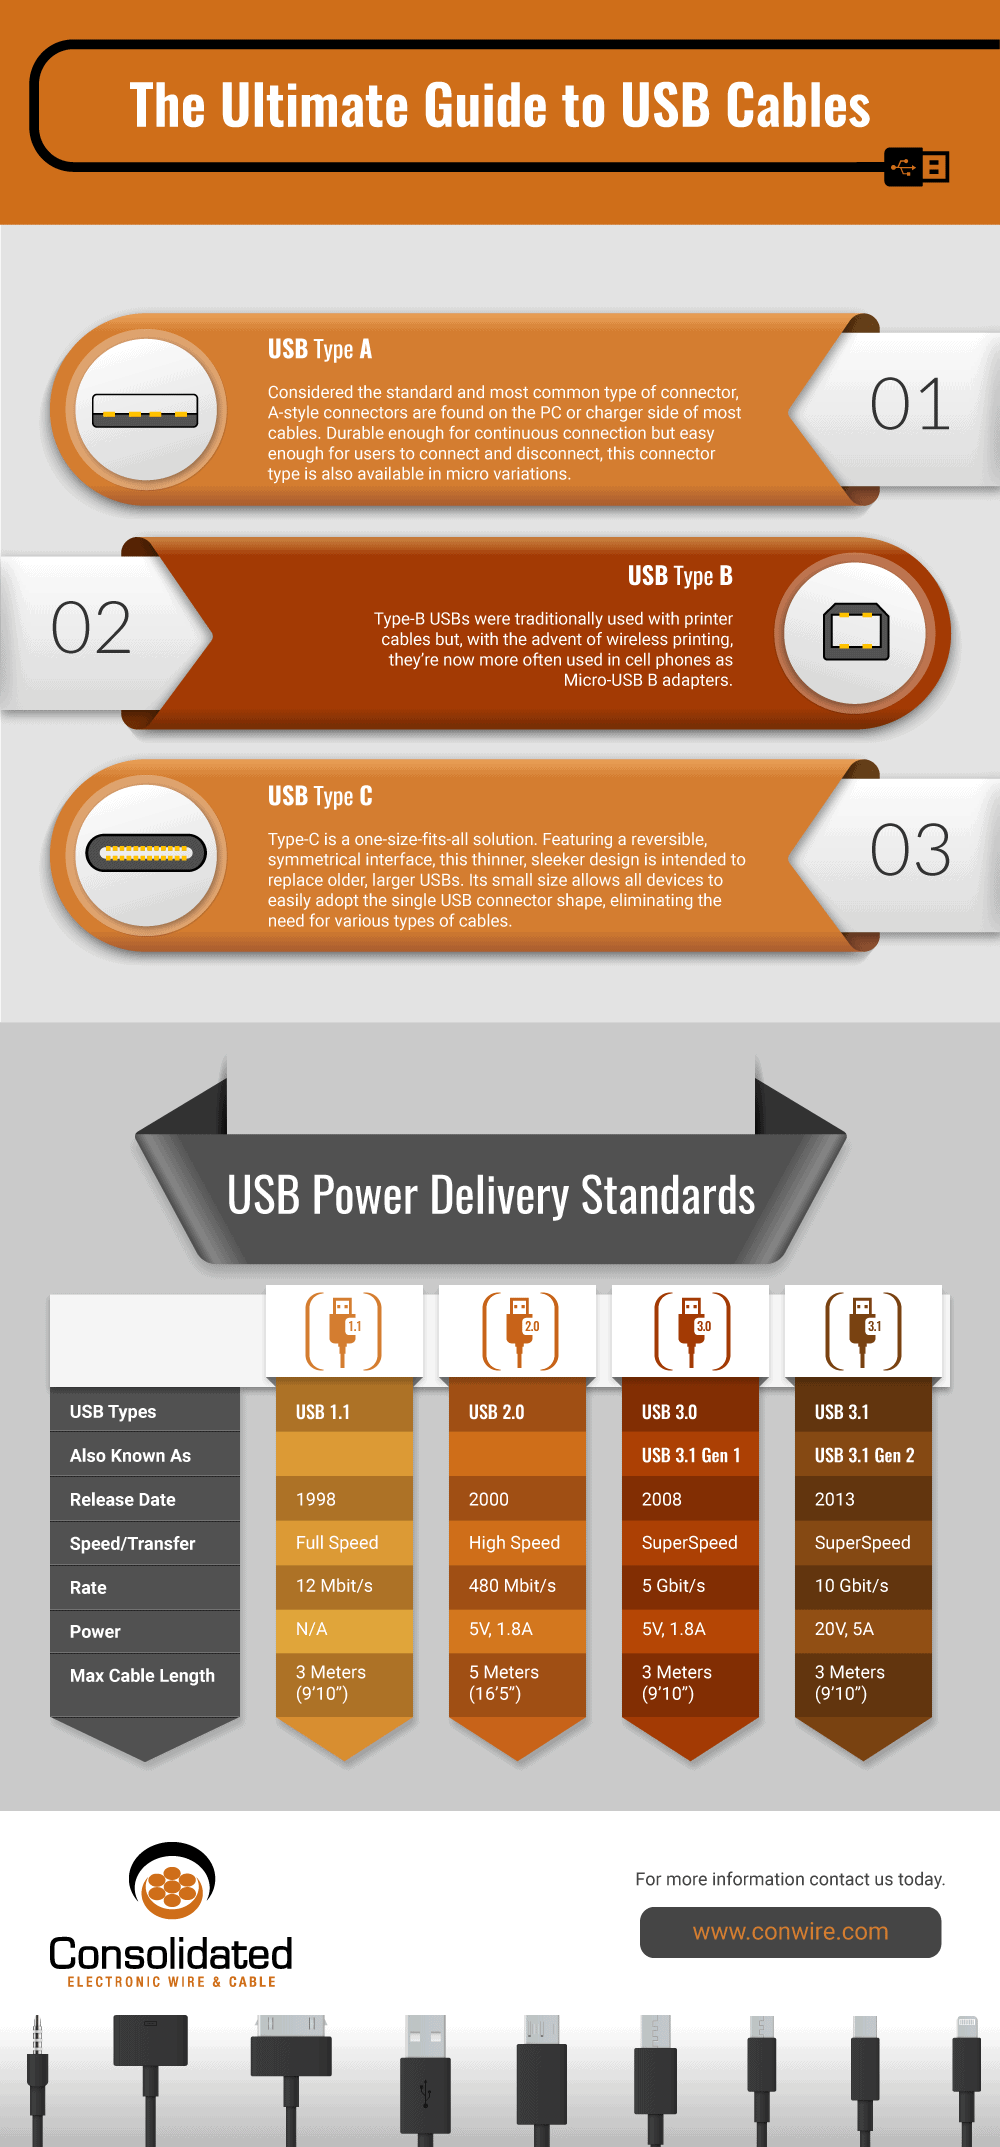 What are the Maximum Power Output and Data Transfer Rates for the USB  Standards?